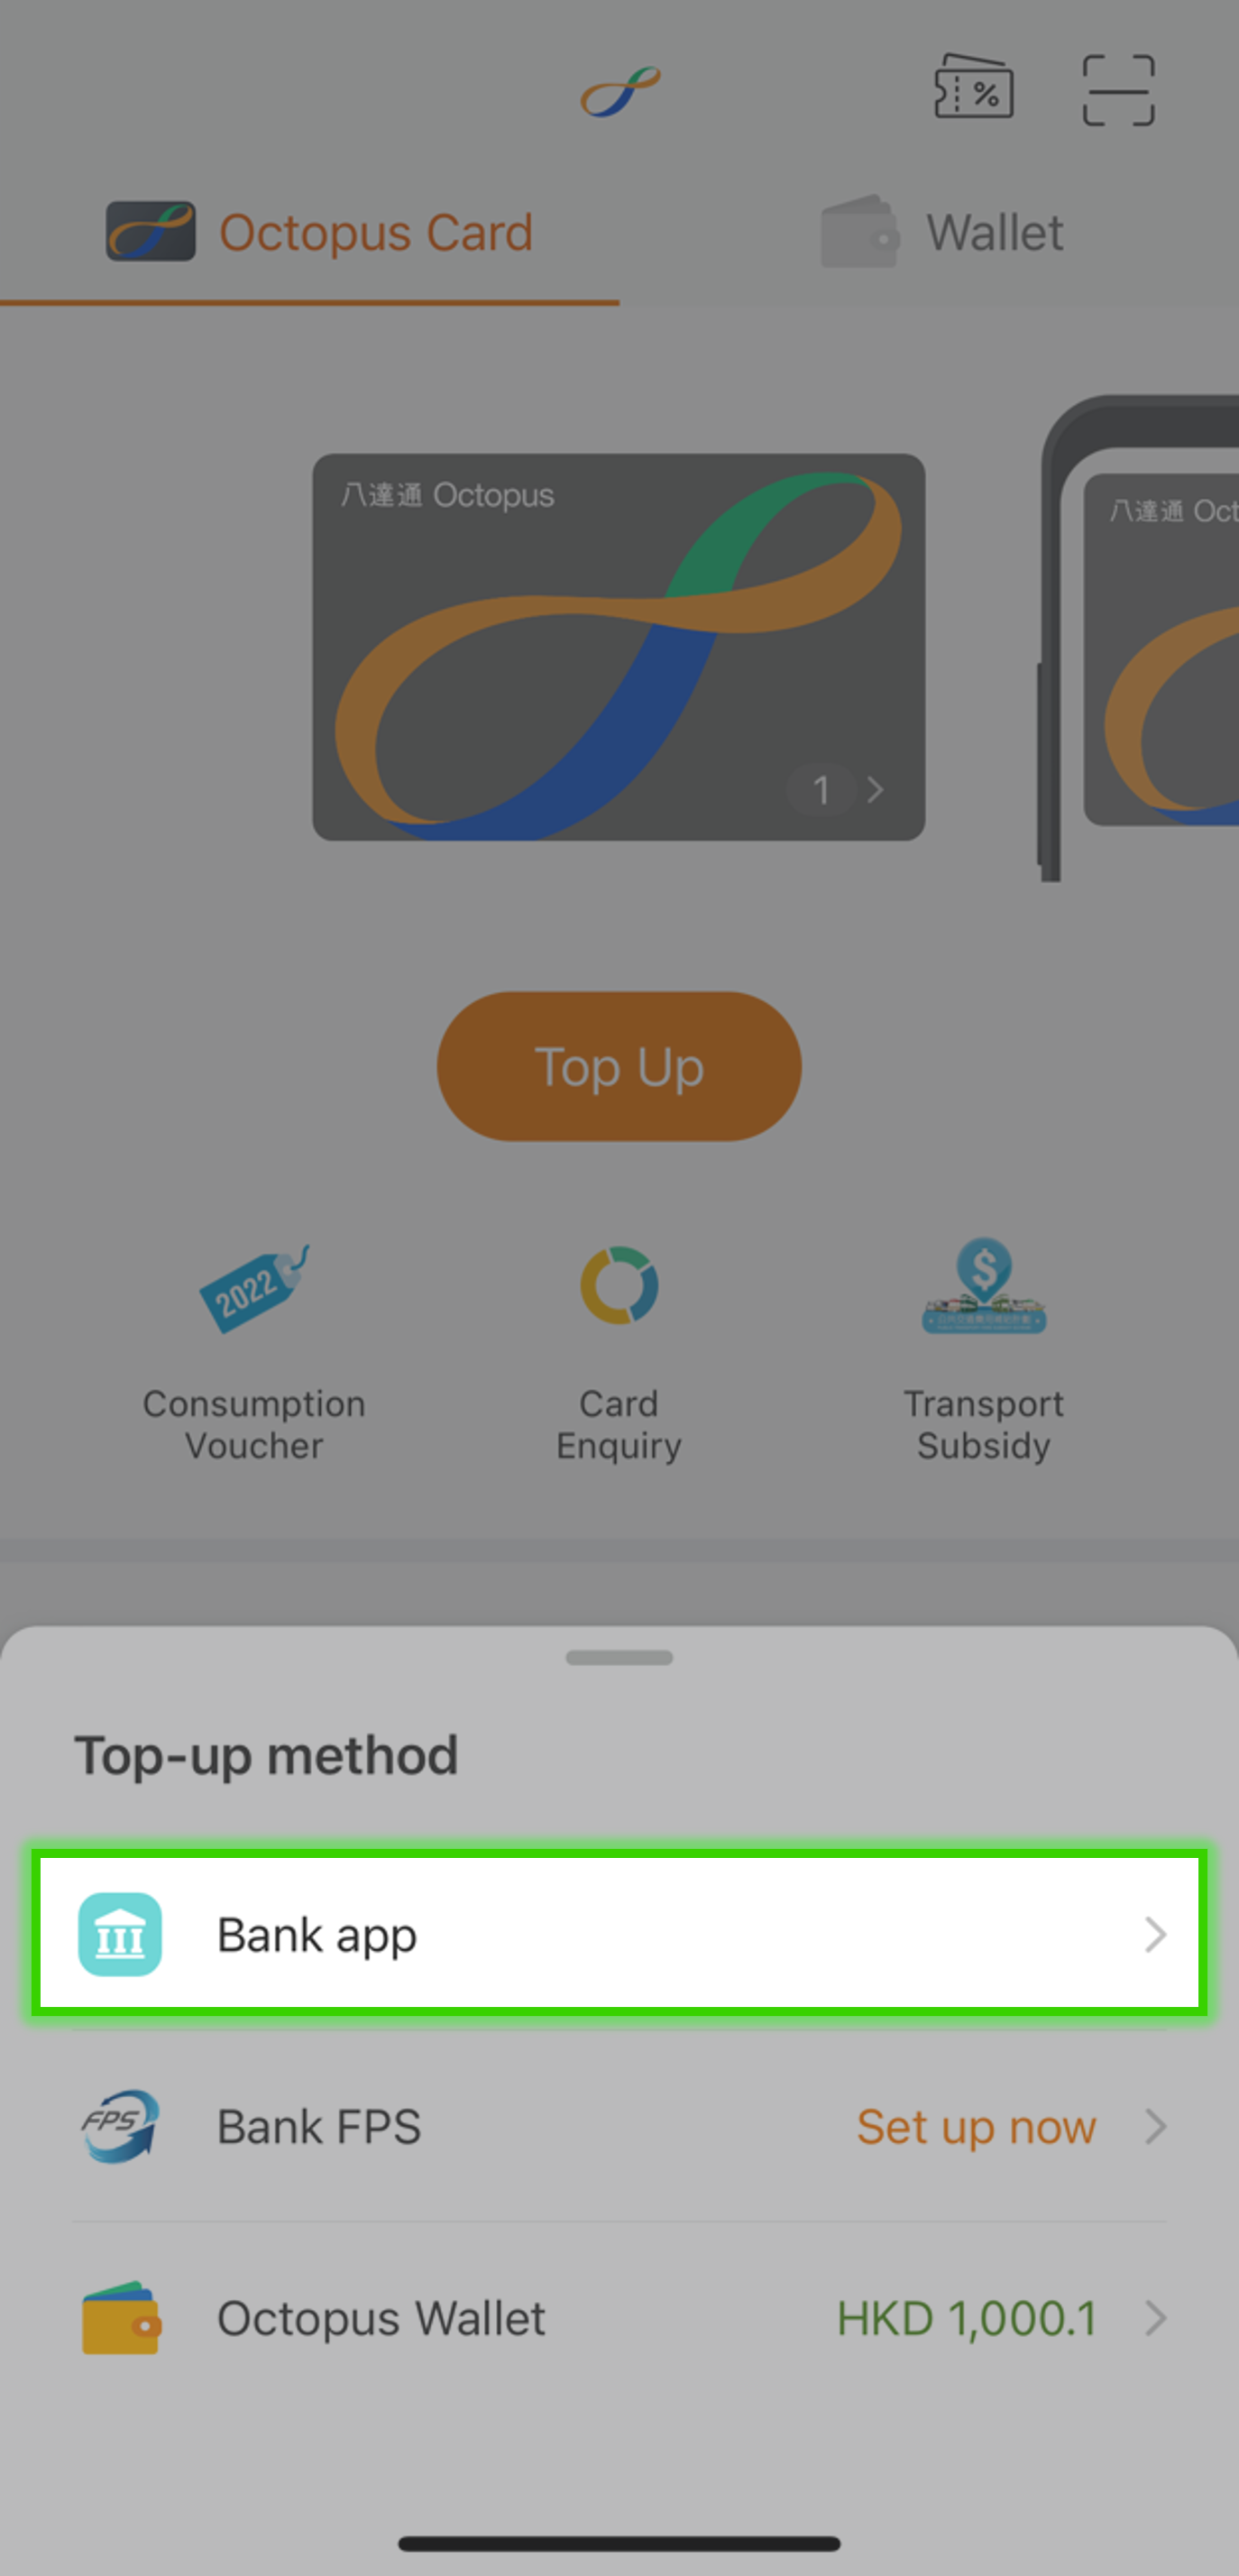 Register for SC Pay (FPS). In Octopus App, select ‘Top Up’ then ‘Bank app’